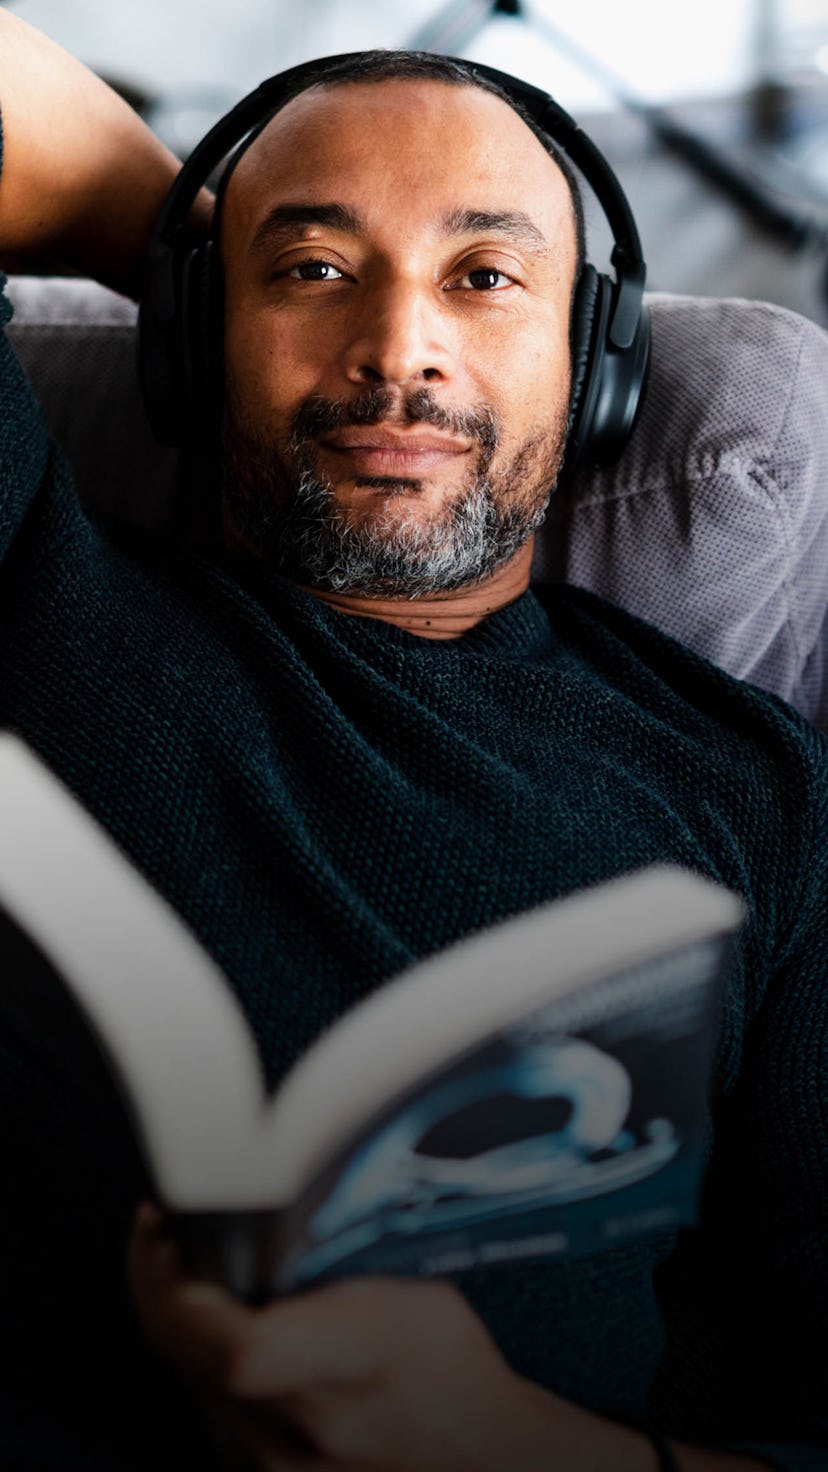 A middle-aged man lying and listening to music on his headphones